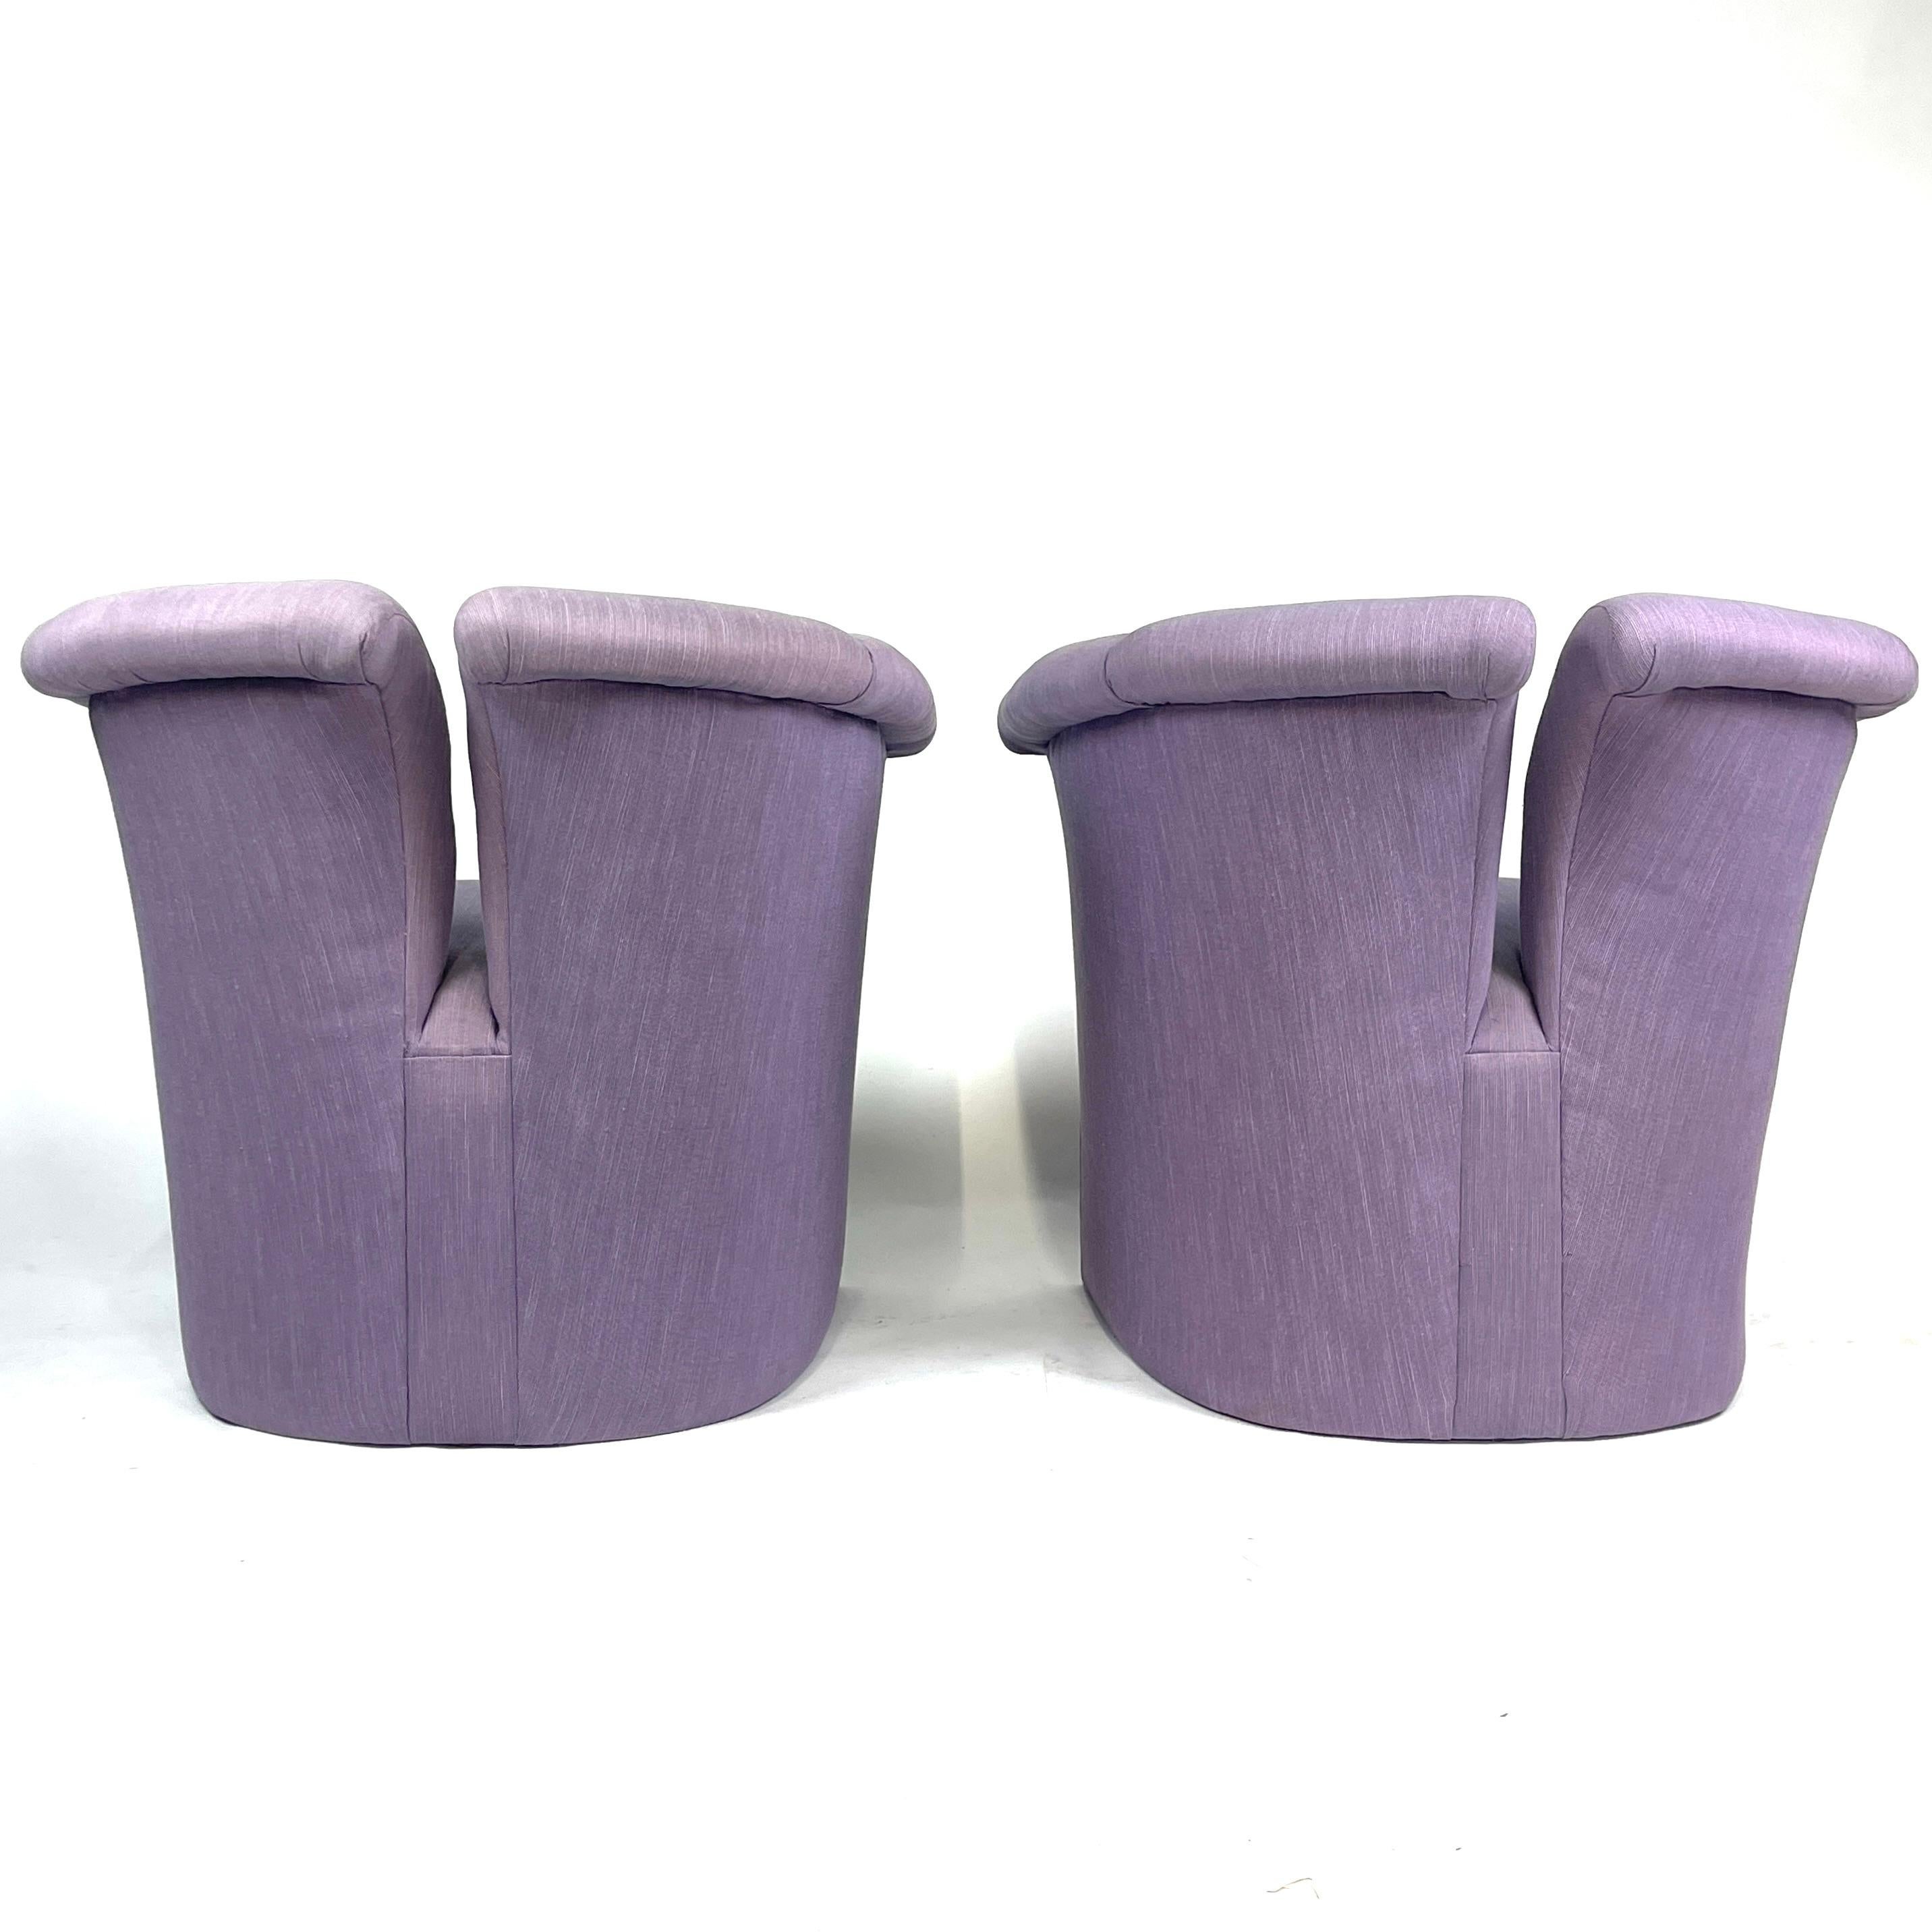 Stunning Pair of Split Back Postmodern Barrel Chairs in Excellent Upholstery For Sale 4